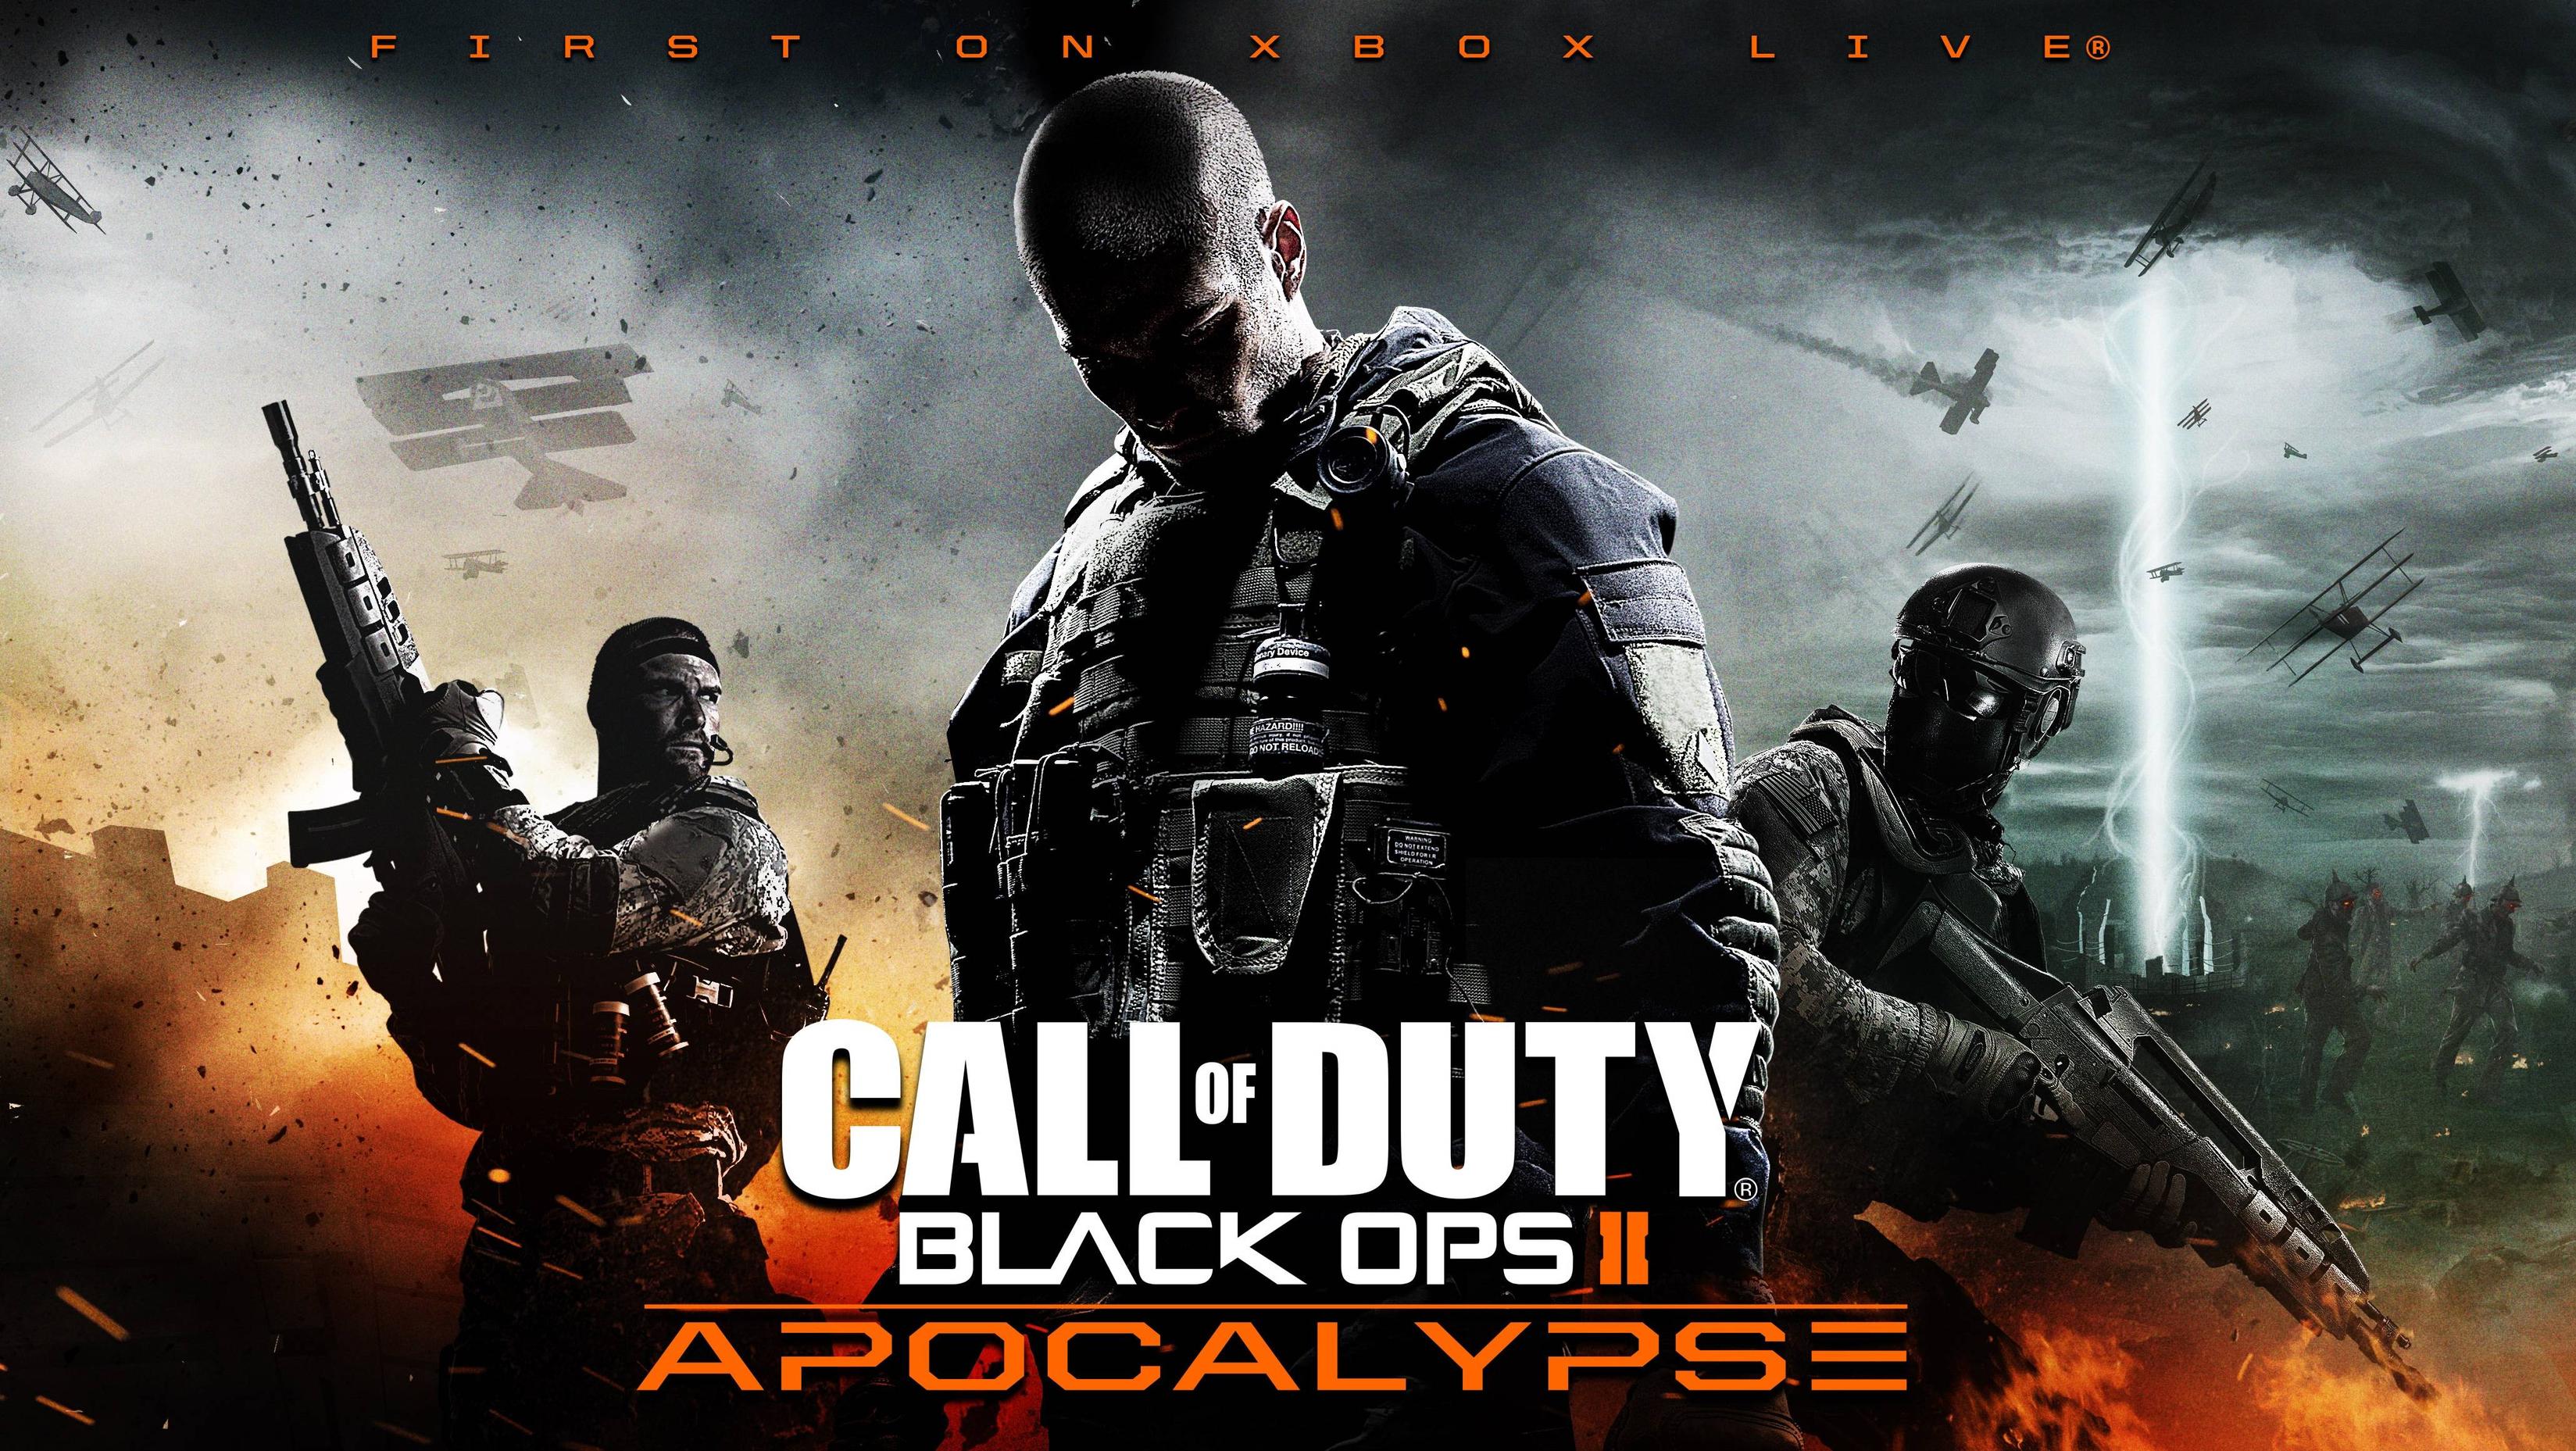 Call of Duty Black Ops 2 HD Wallpapers - BACKGROUND WALLPAPER